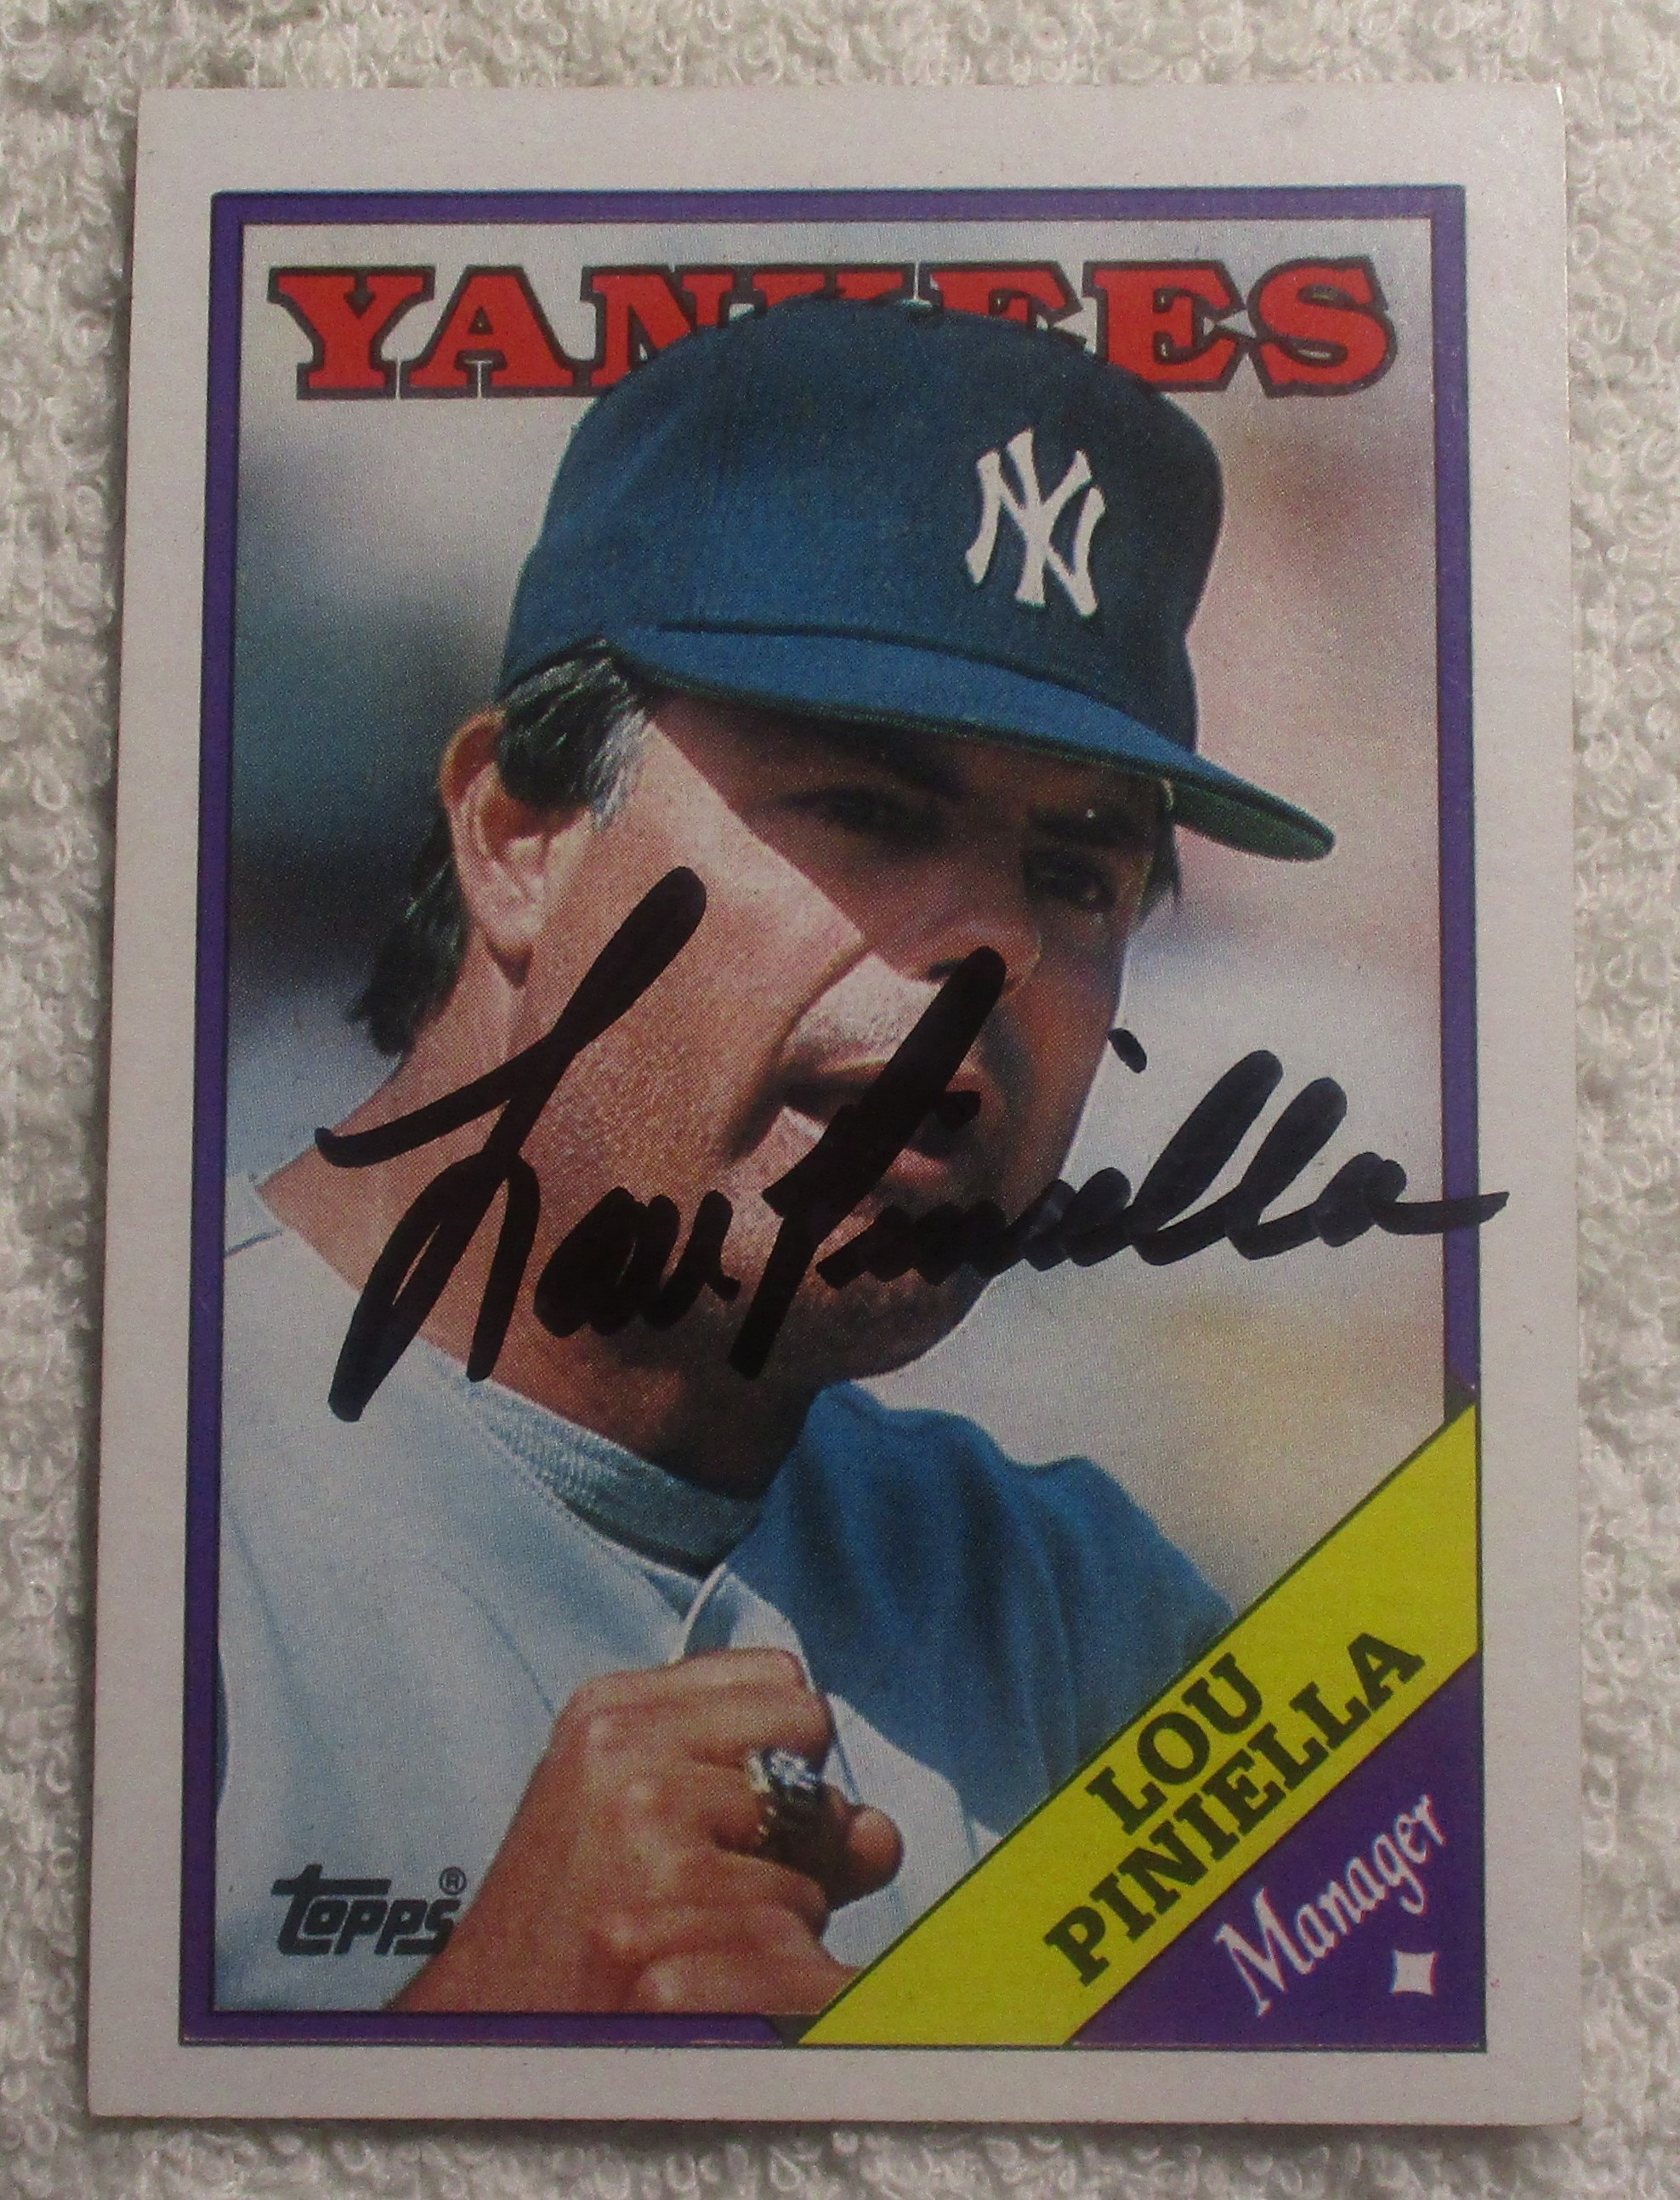 Lou Piniella autographed baseball card (Seattle Mariners Manager